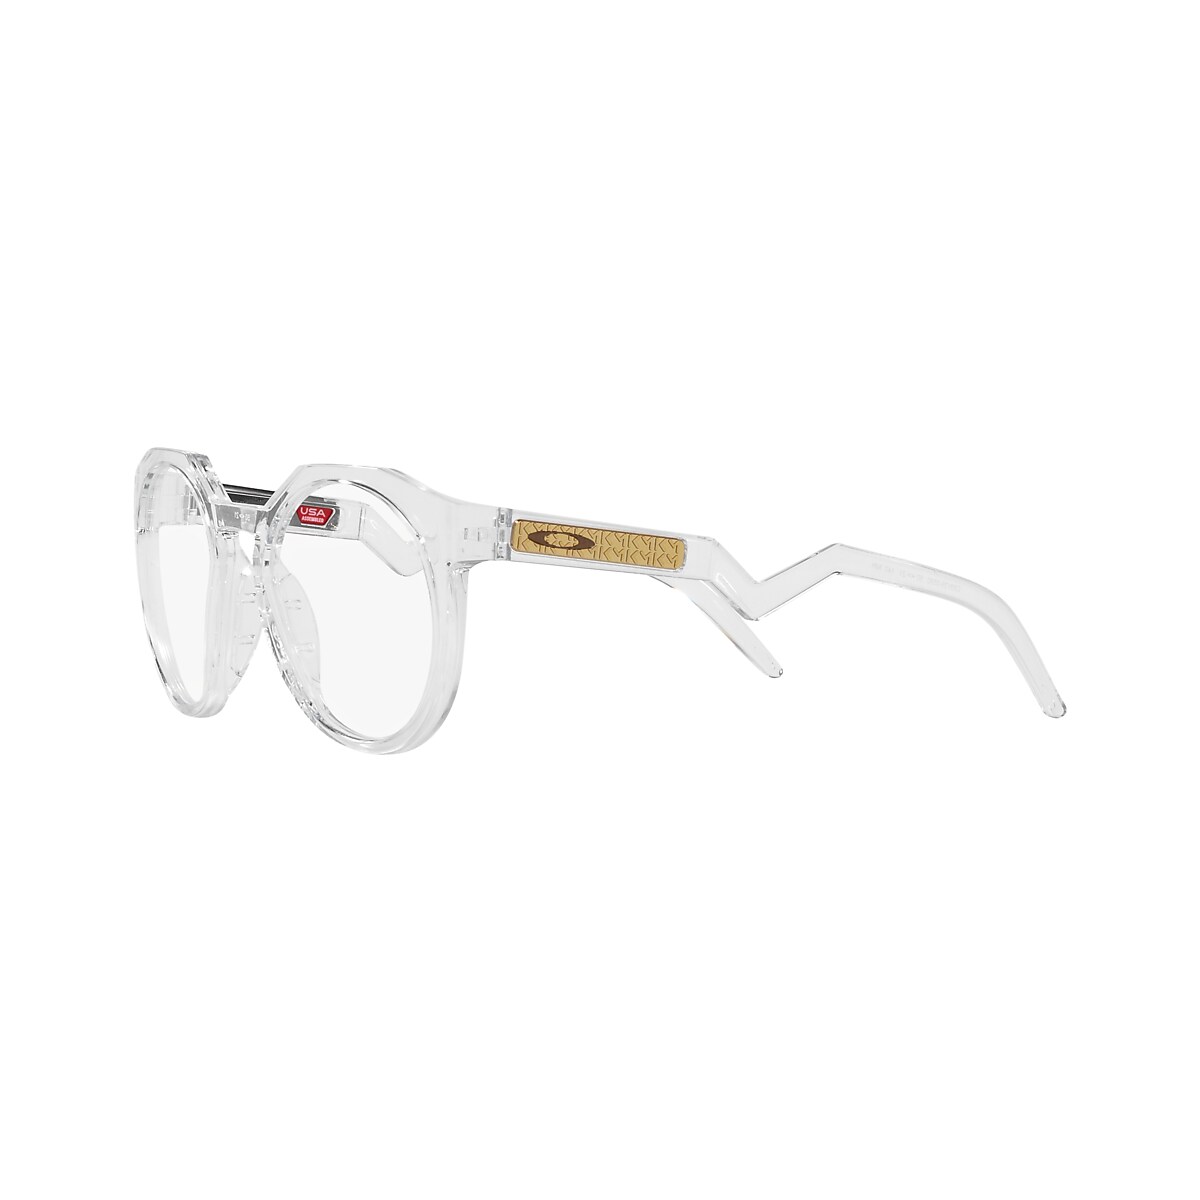 Oakley 0OX8139 Glasses in Clear/white | Target Optical